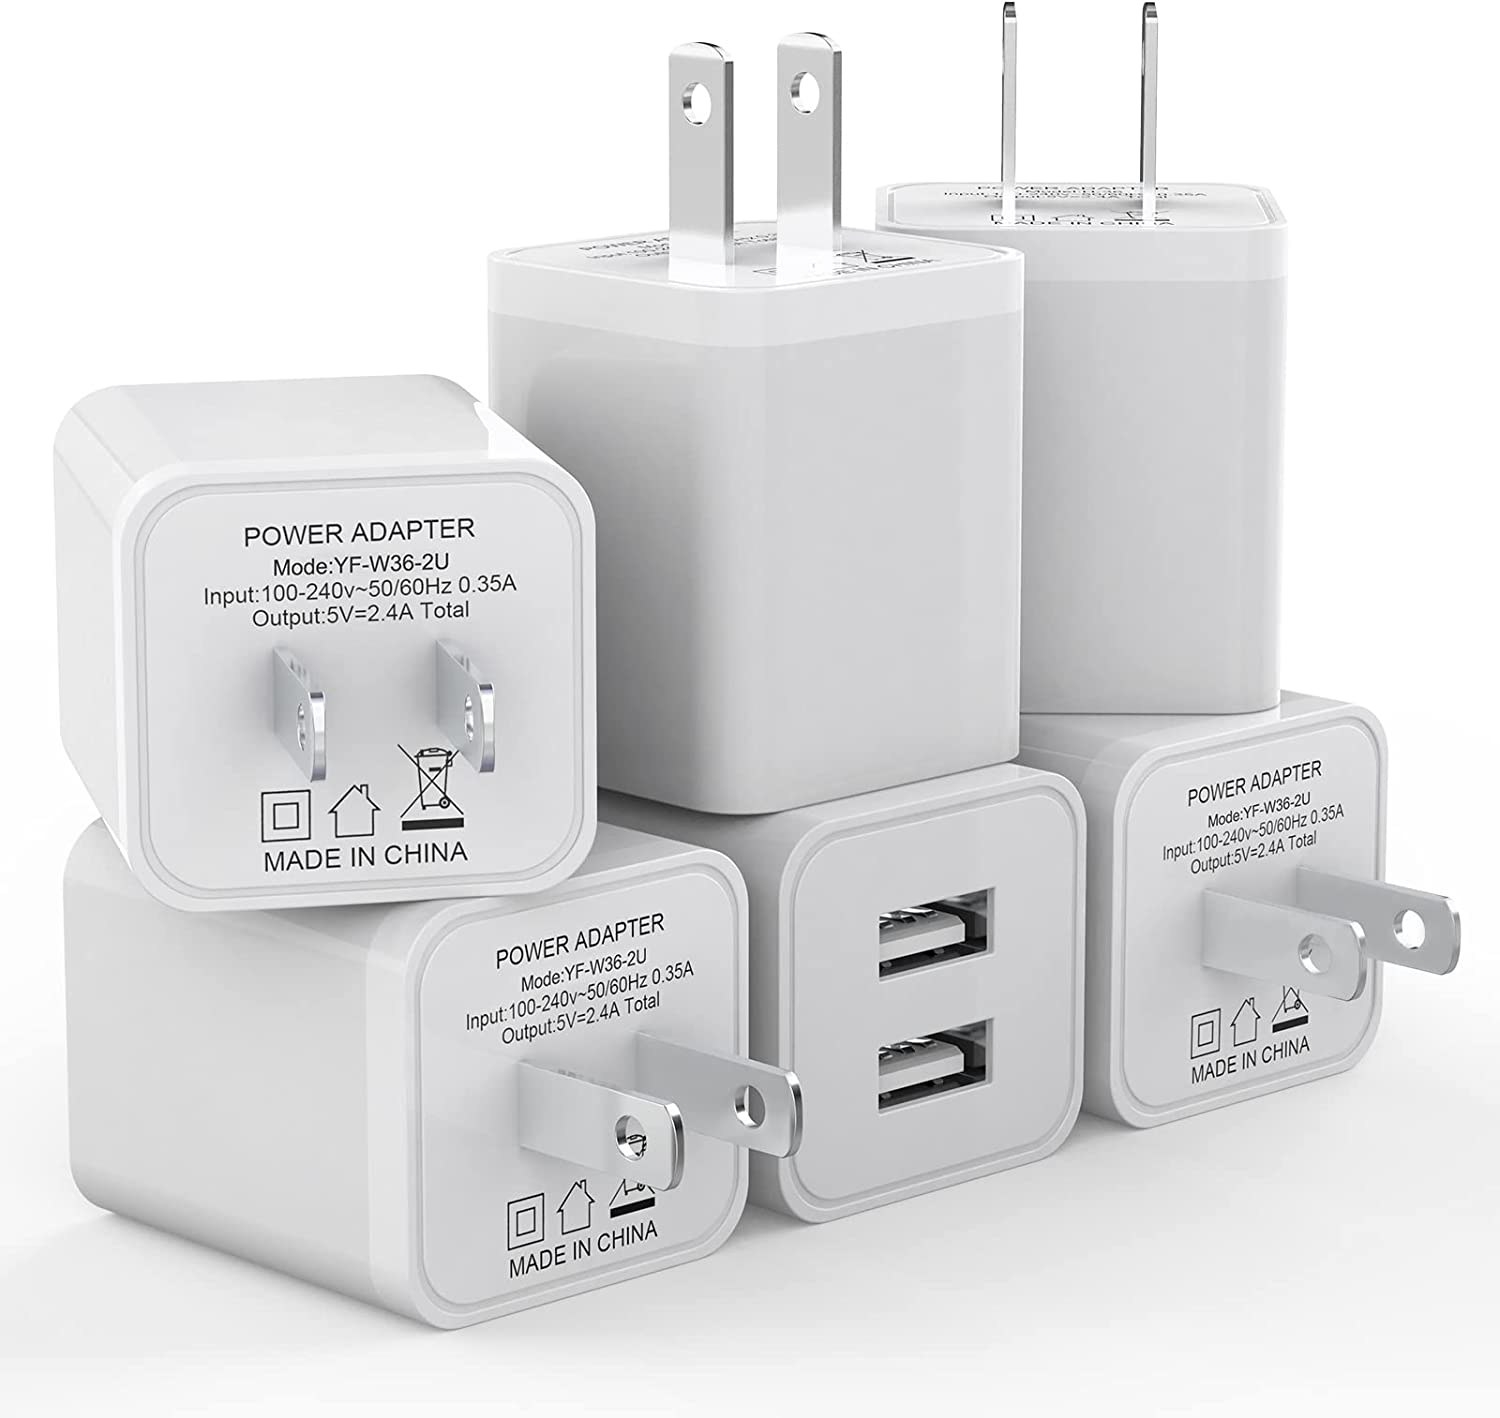 the pack of white USB wall chargers